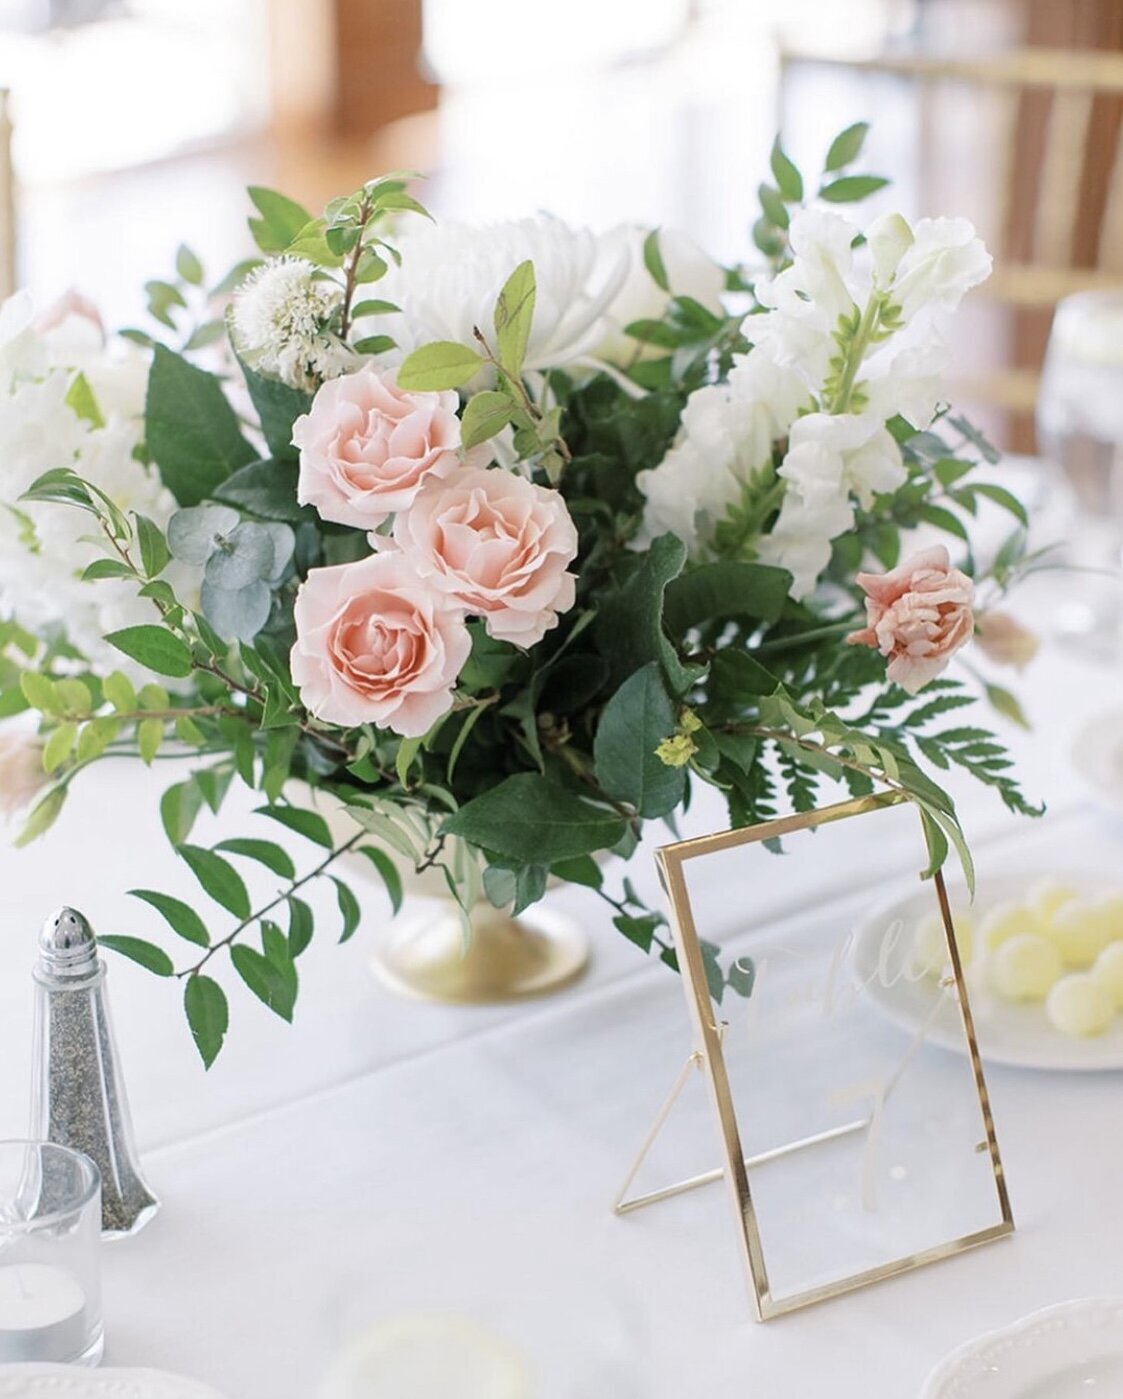 Bright white and pink floral wedding center piece by Boston florist Prose Florals